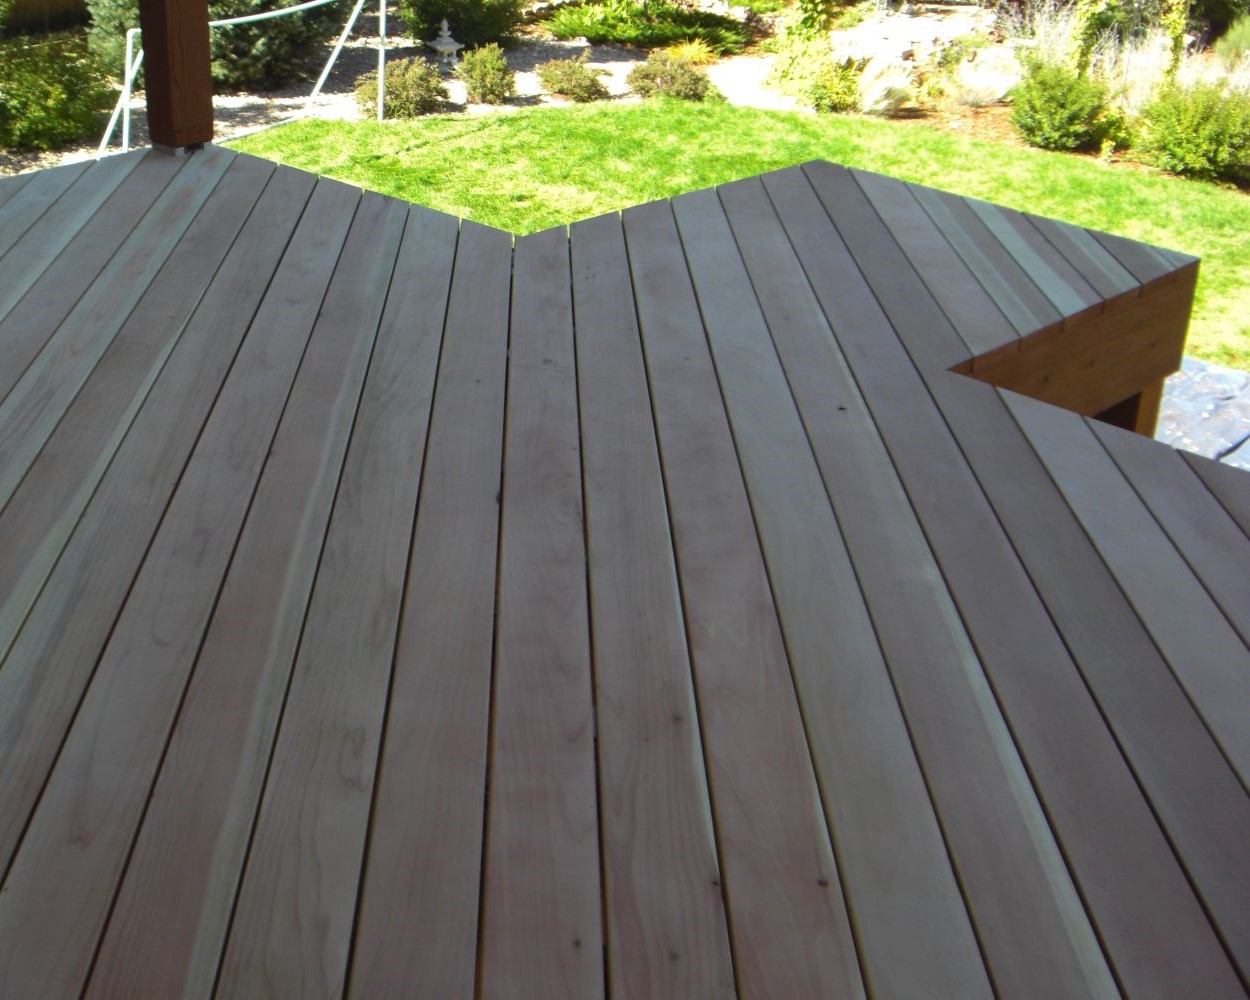 An unstained B-Grade Redwood deck with the boards laid at a 45-degree angle to the joists.